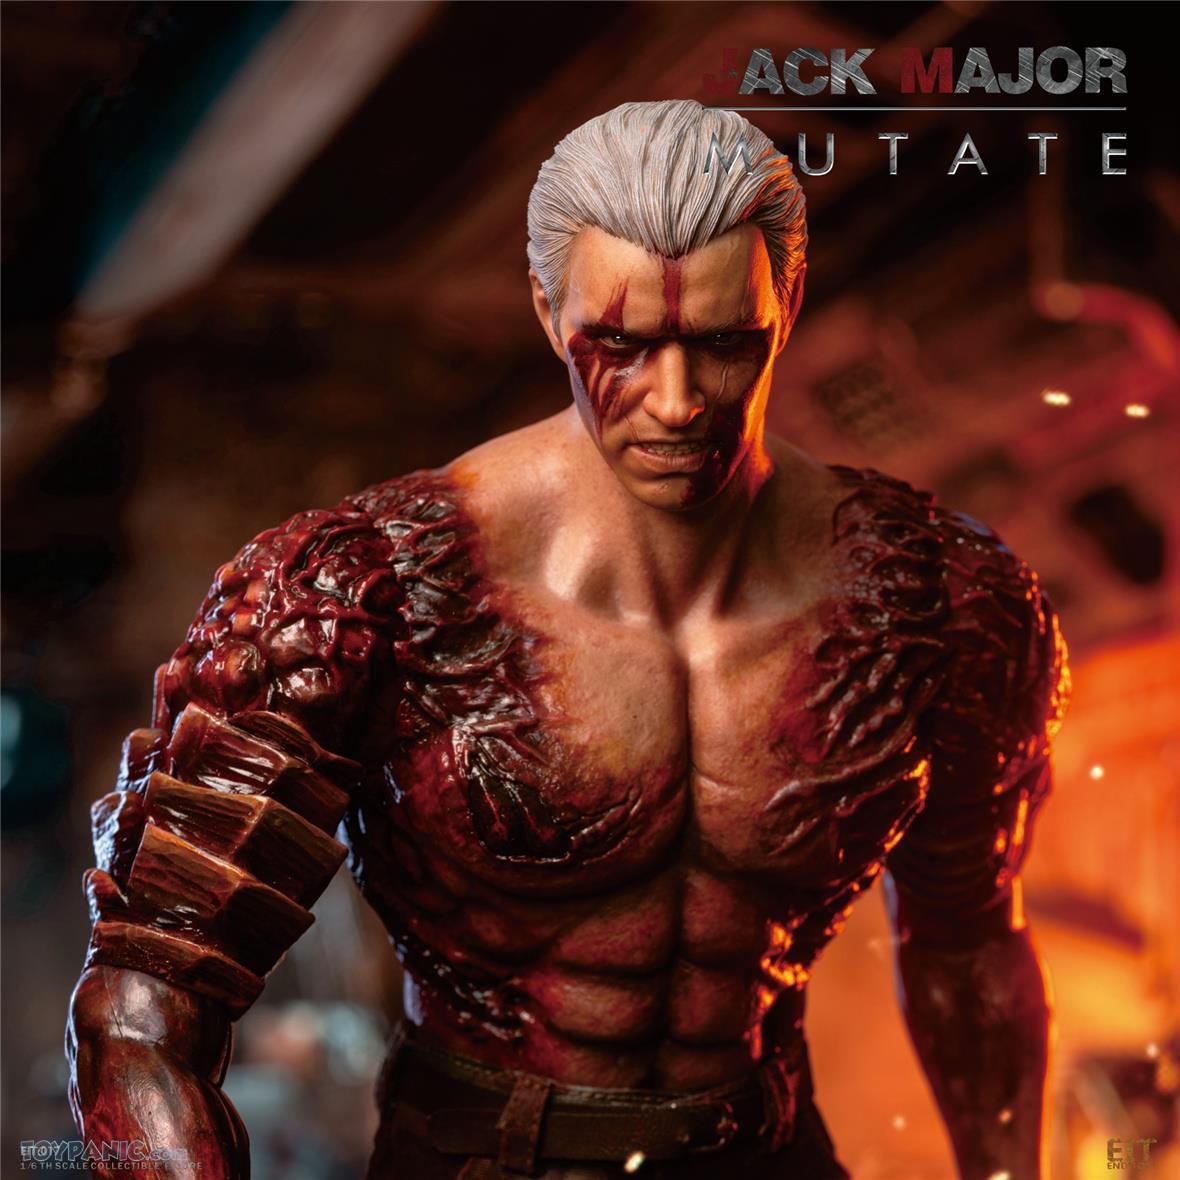 residentevil - NEW PRODUCT:  1/6 Jack Major Mutate from End I Toys  2732024105954AM_1069441